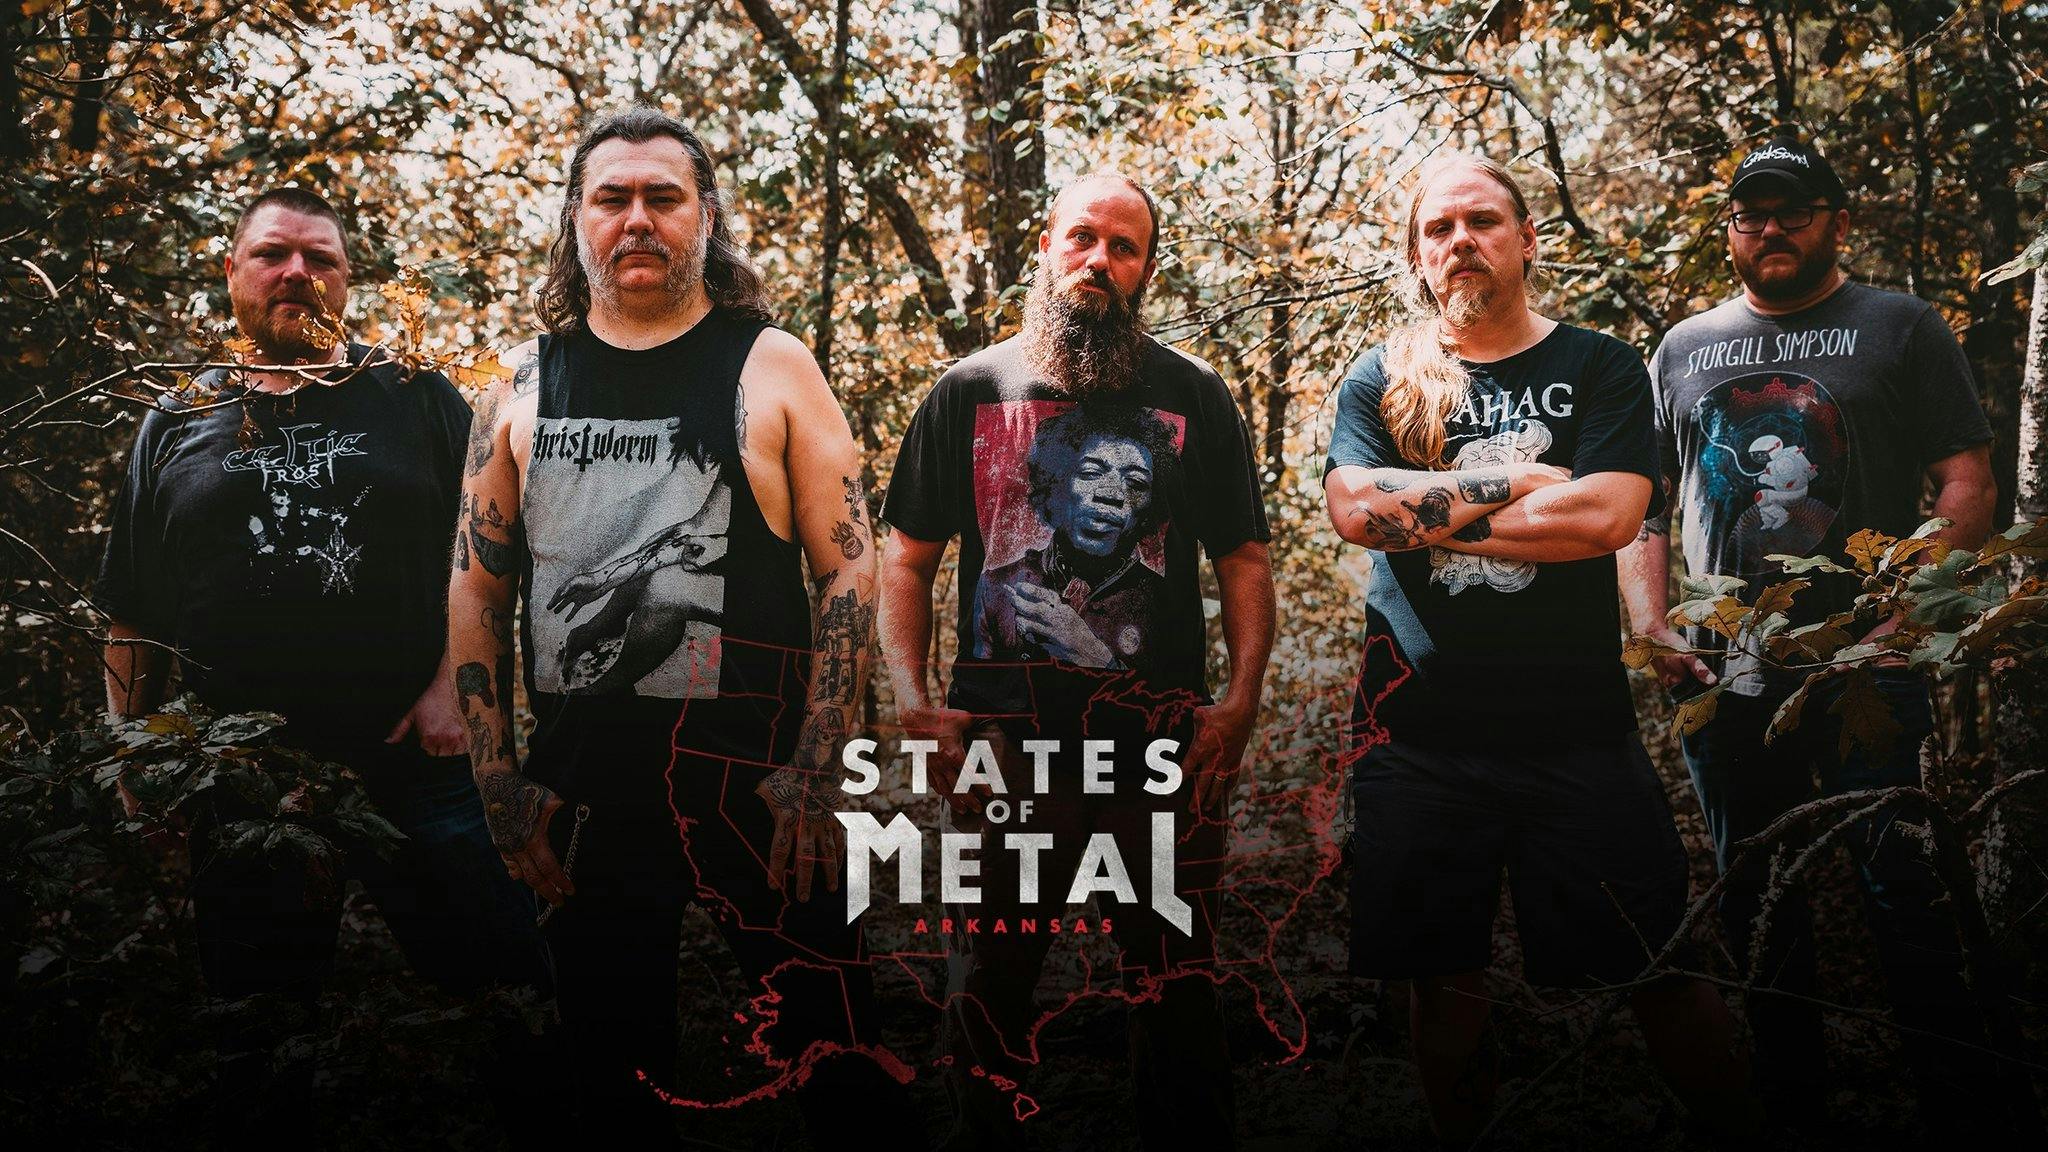 States of Metal: Arkansas Has An Honest DIY Ethos And A Vortex of Darkness At Its Core